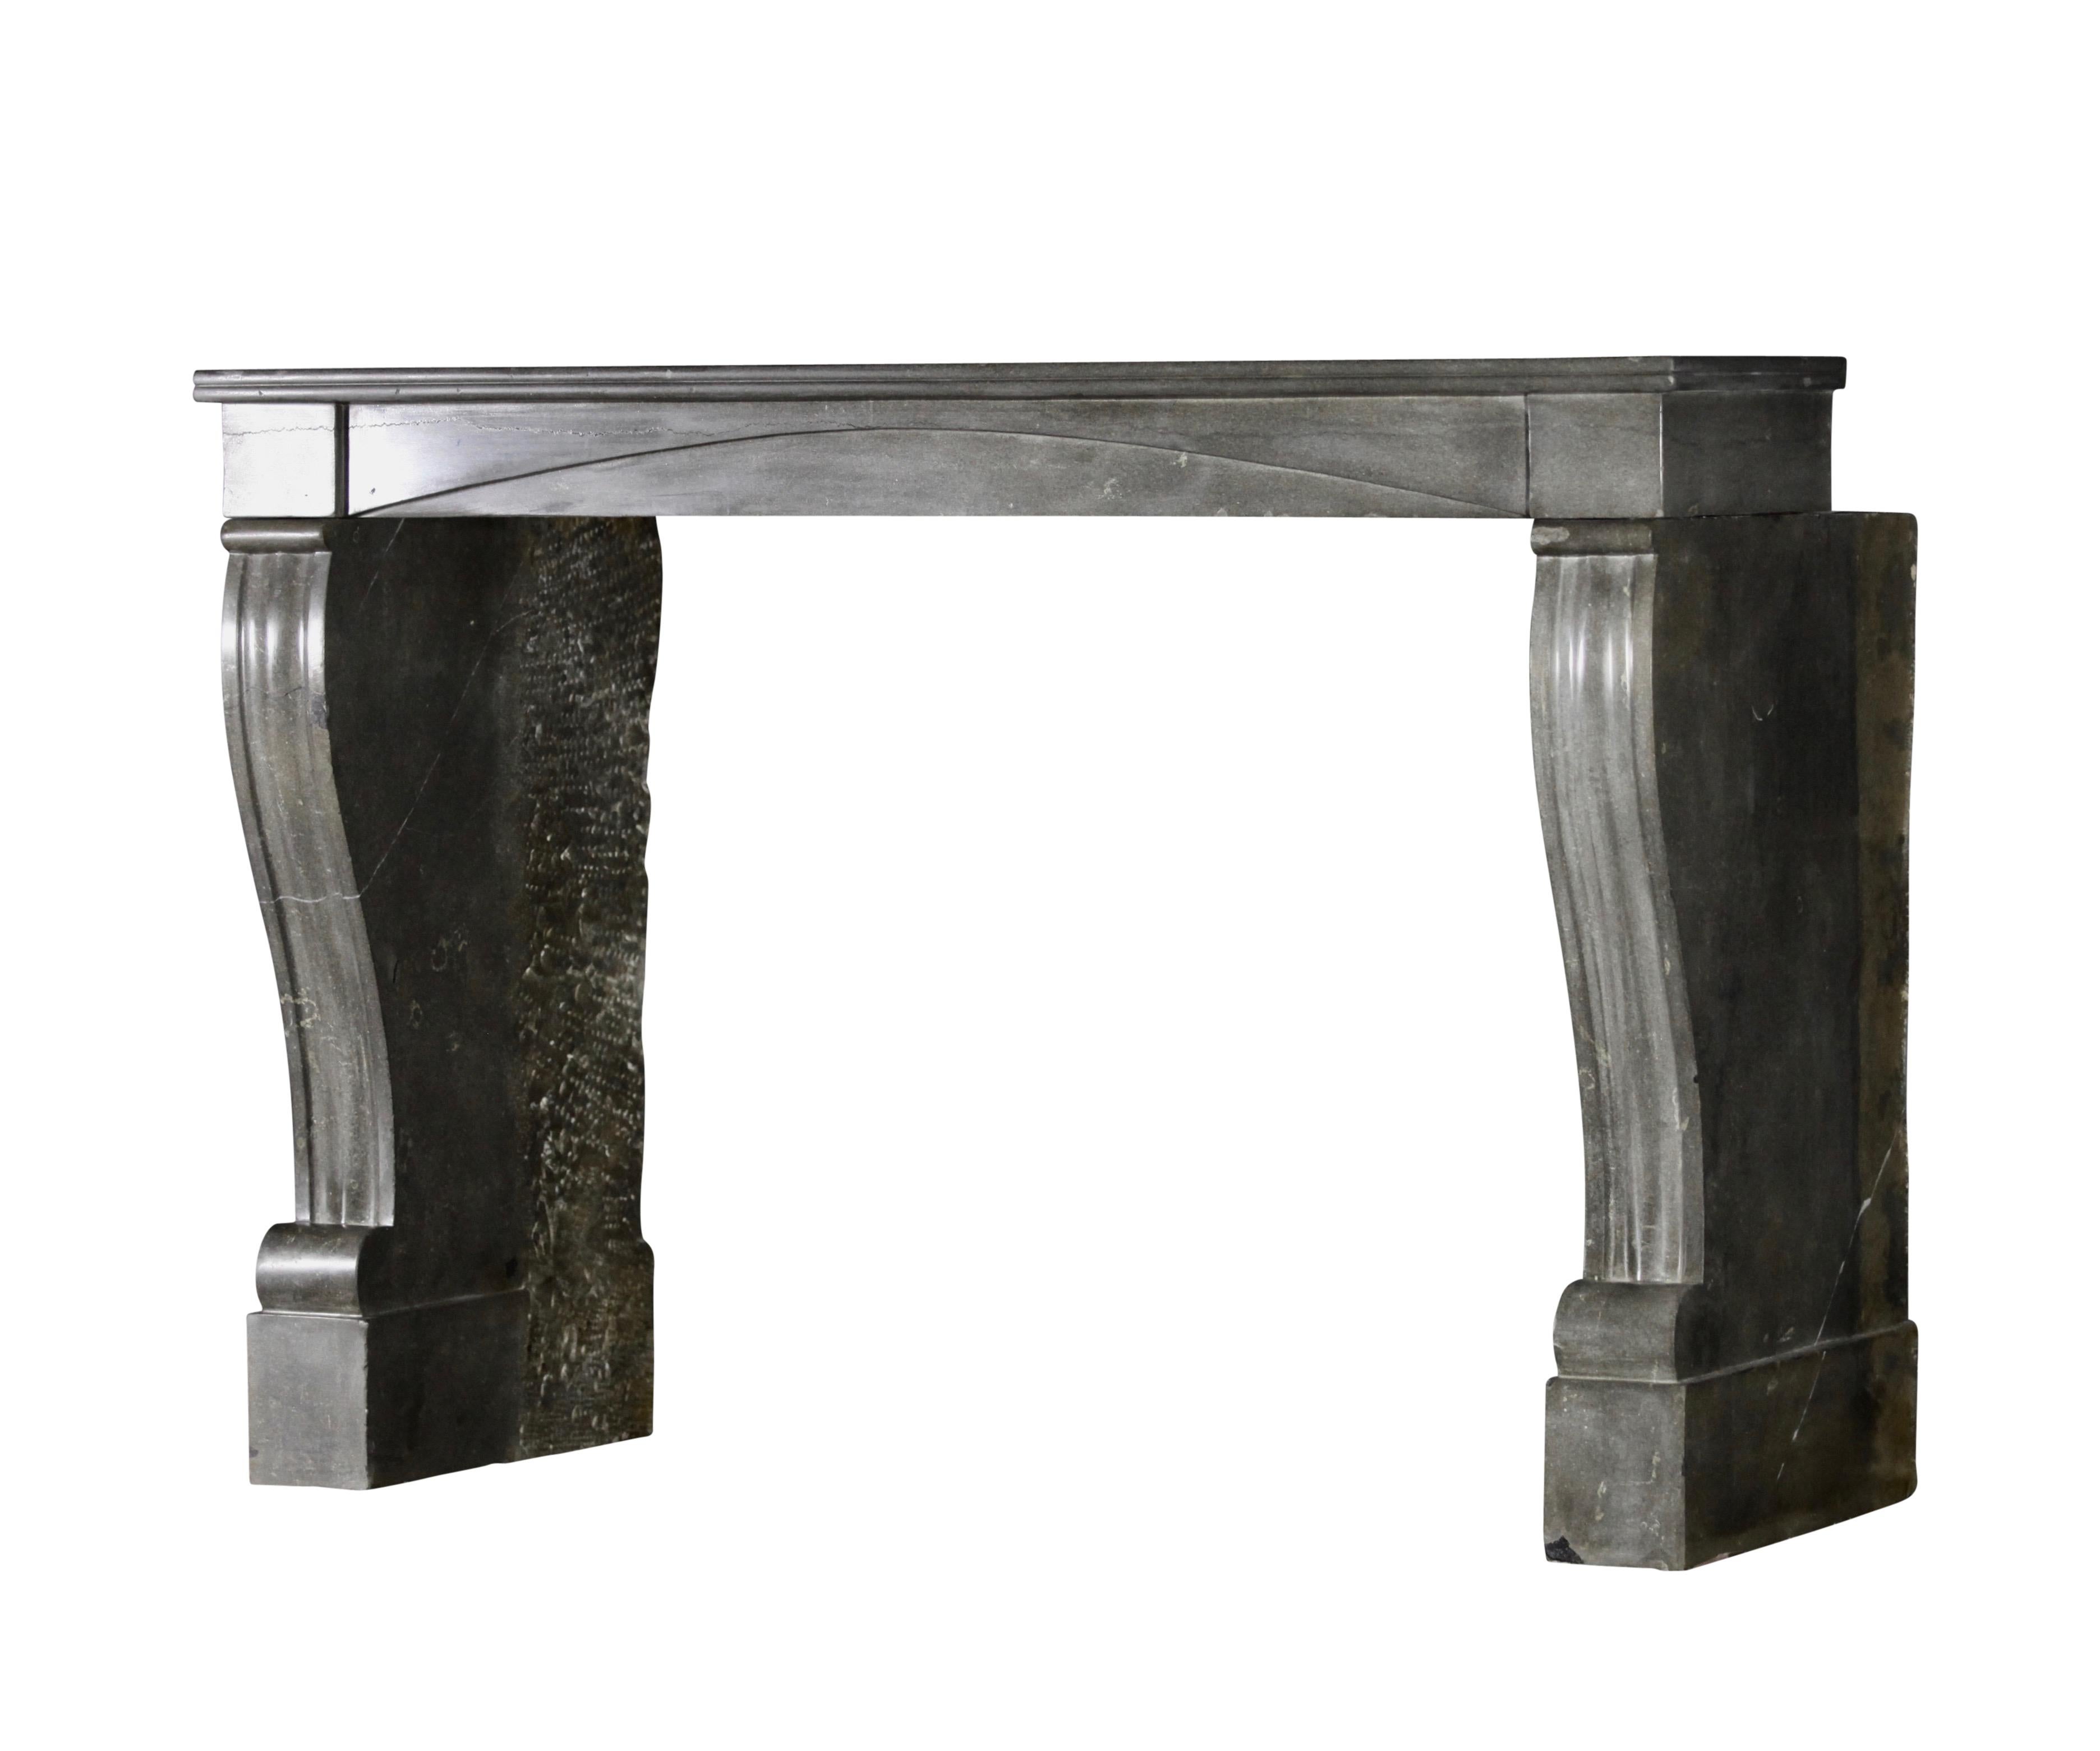 This is a very nice grey-green, marble stone original antique fireplace mantel. The design of it fits it in timeless and contemporary interiors as well Art Deco ones.
The polished stone reflects the light of the room.
Measures:
143 cm Exterior Width